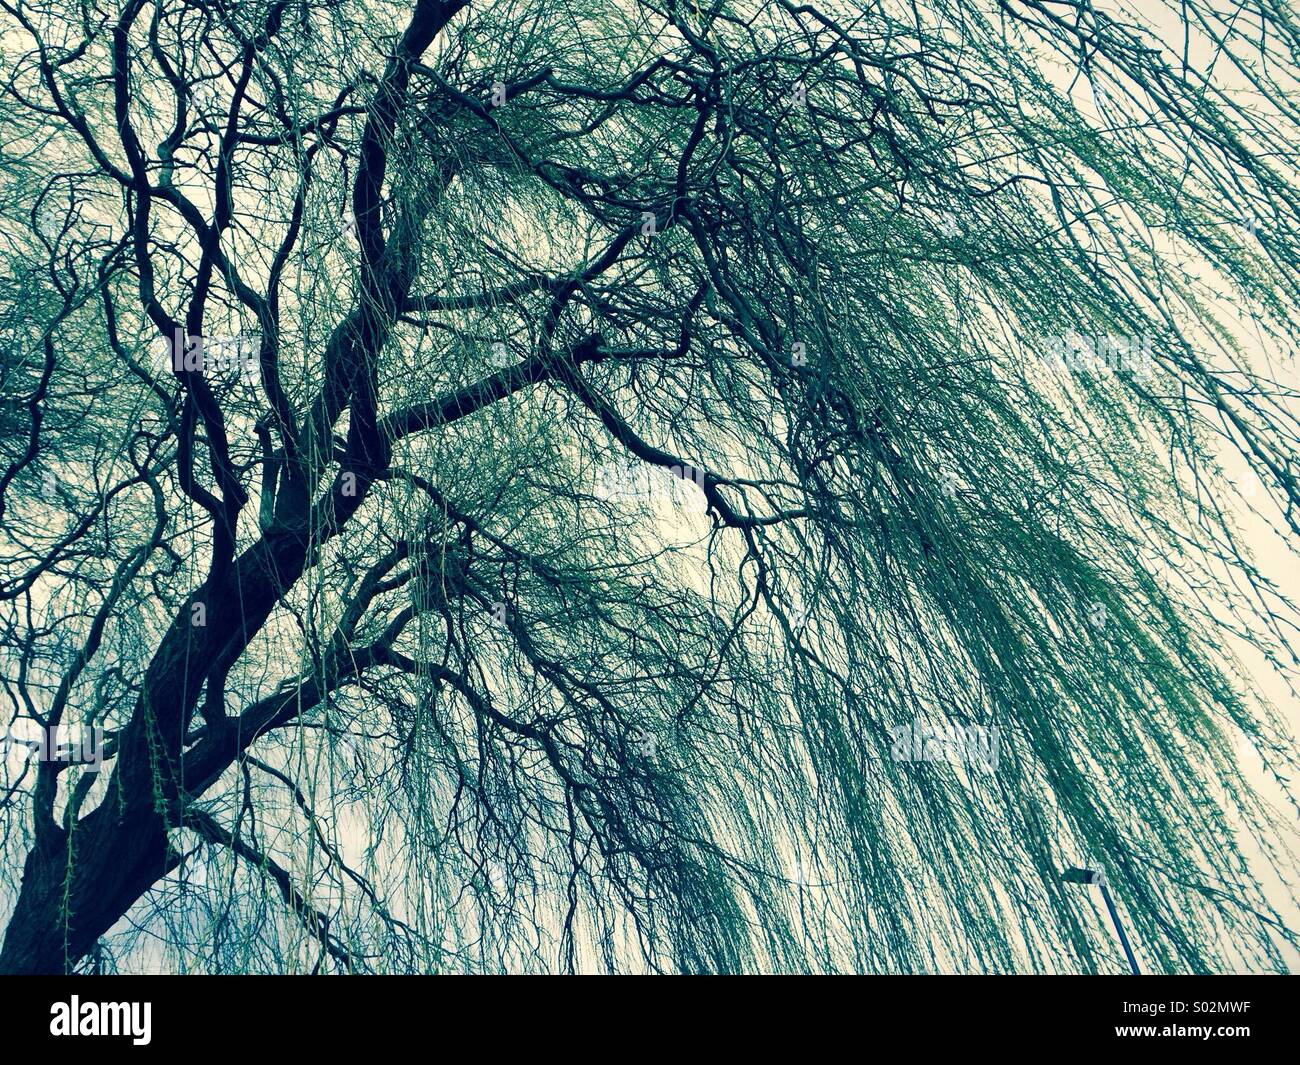 Willow tree in the wind Stock Photo